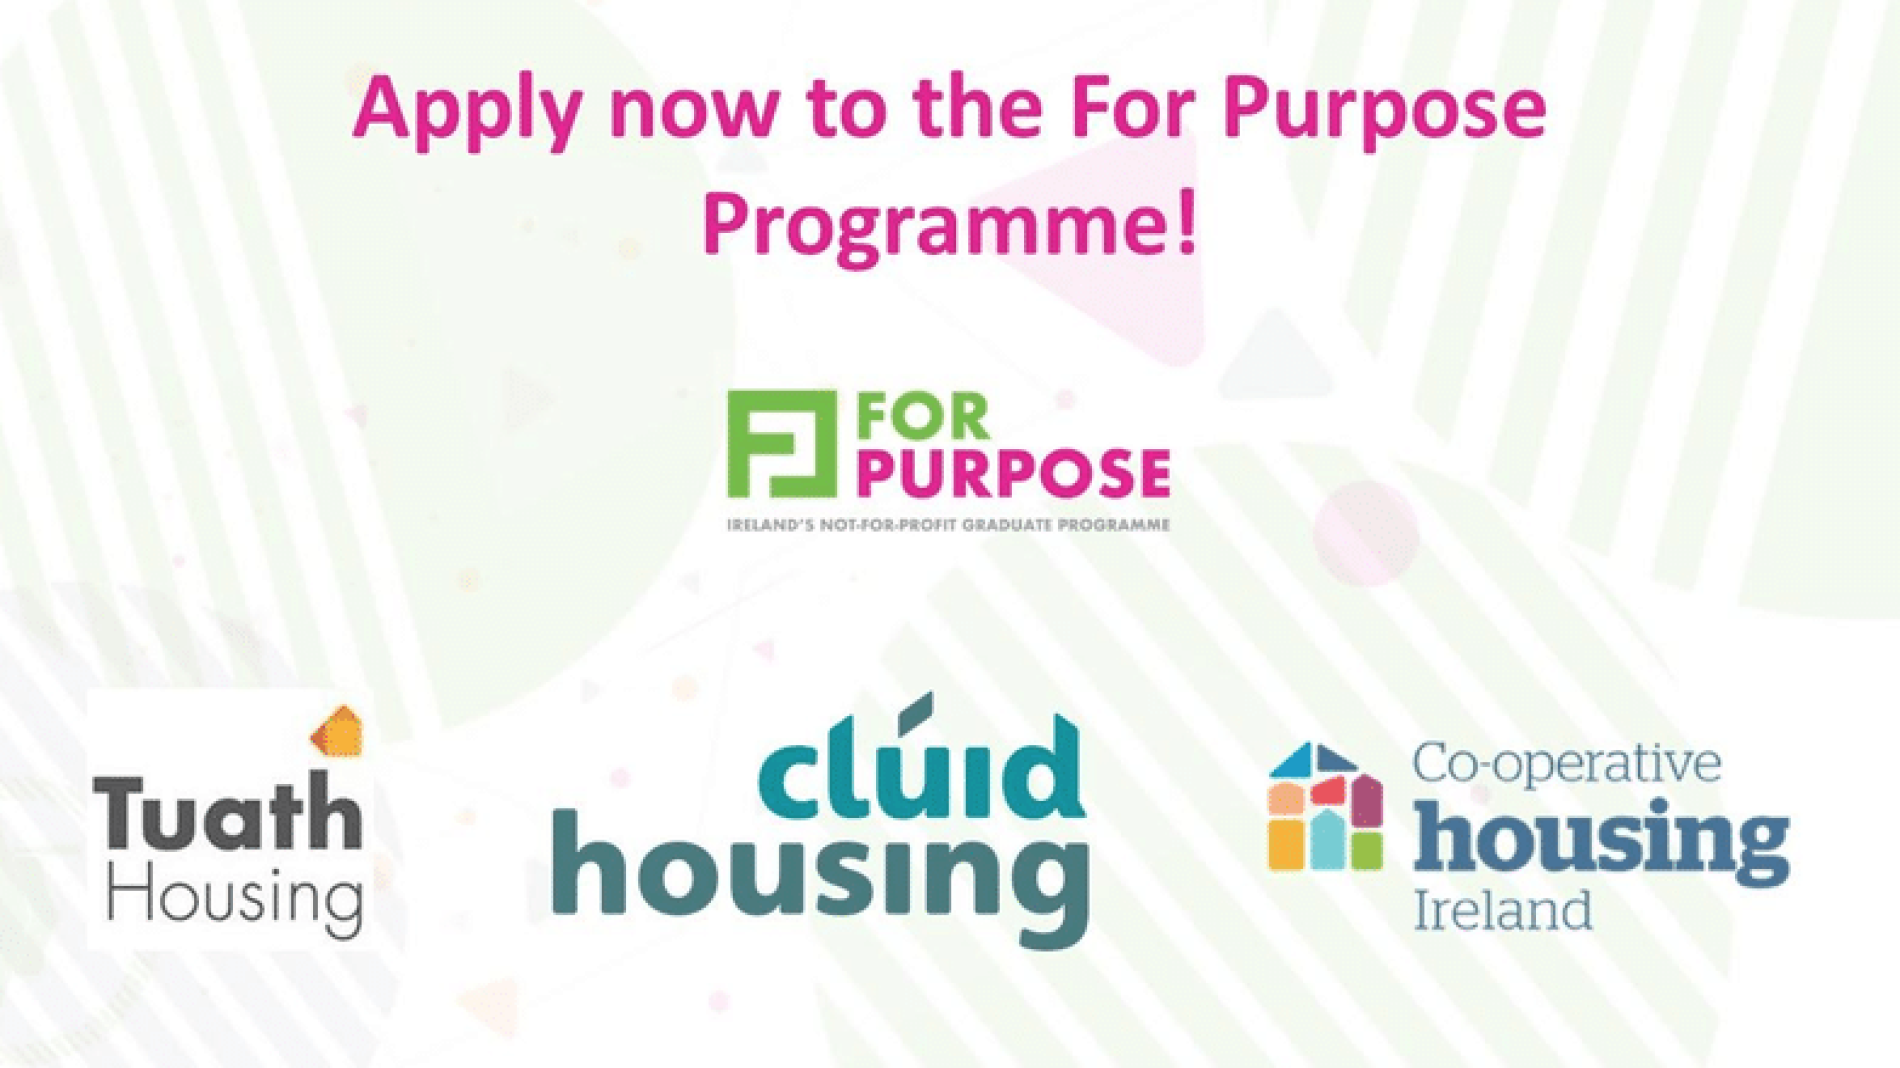 Apply for the For Purpose Social Housing Programme for Graduates